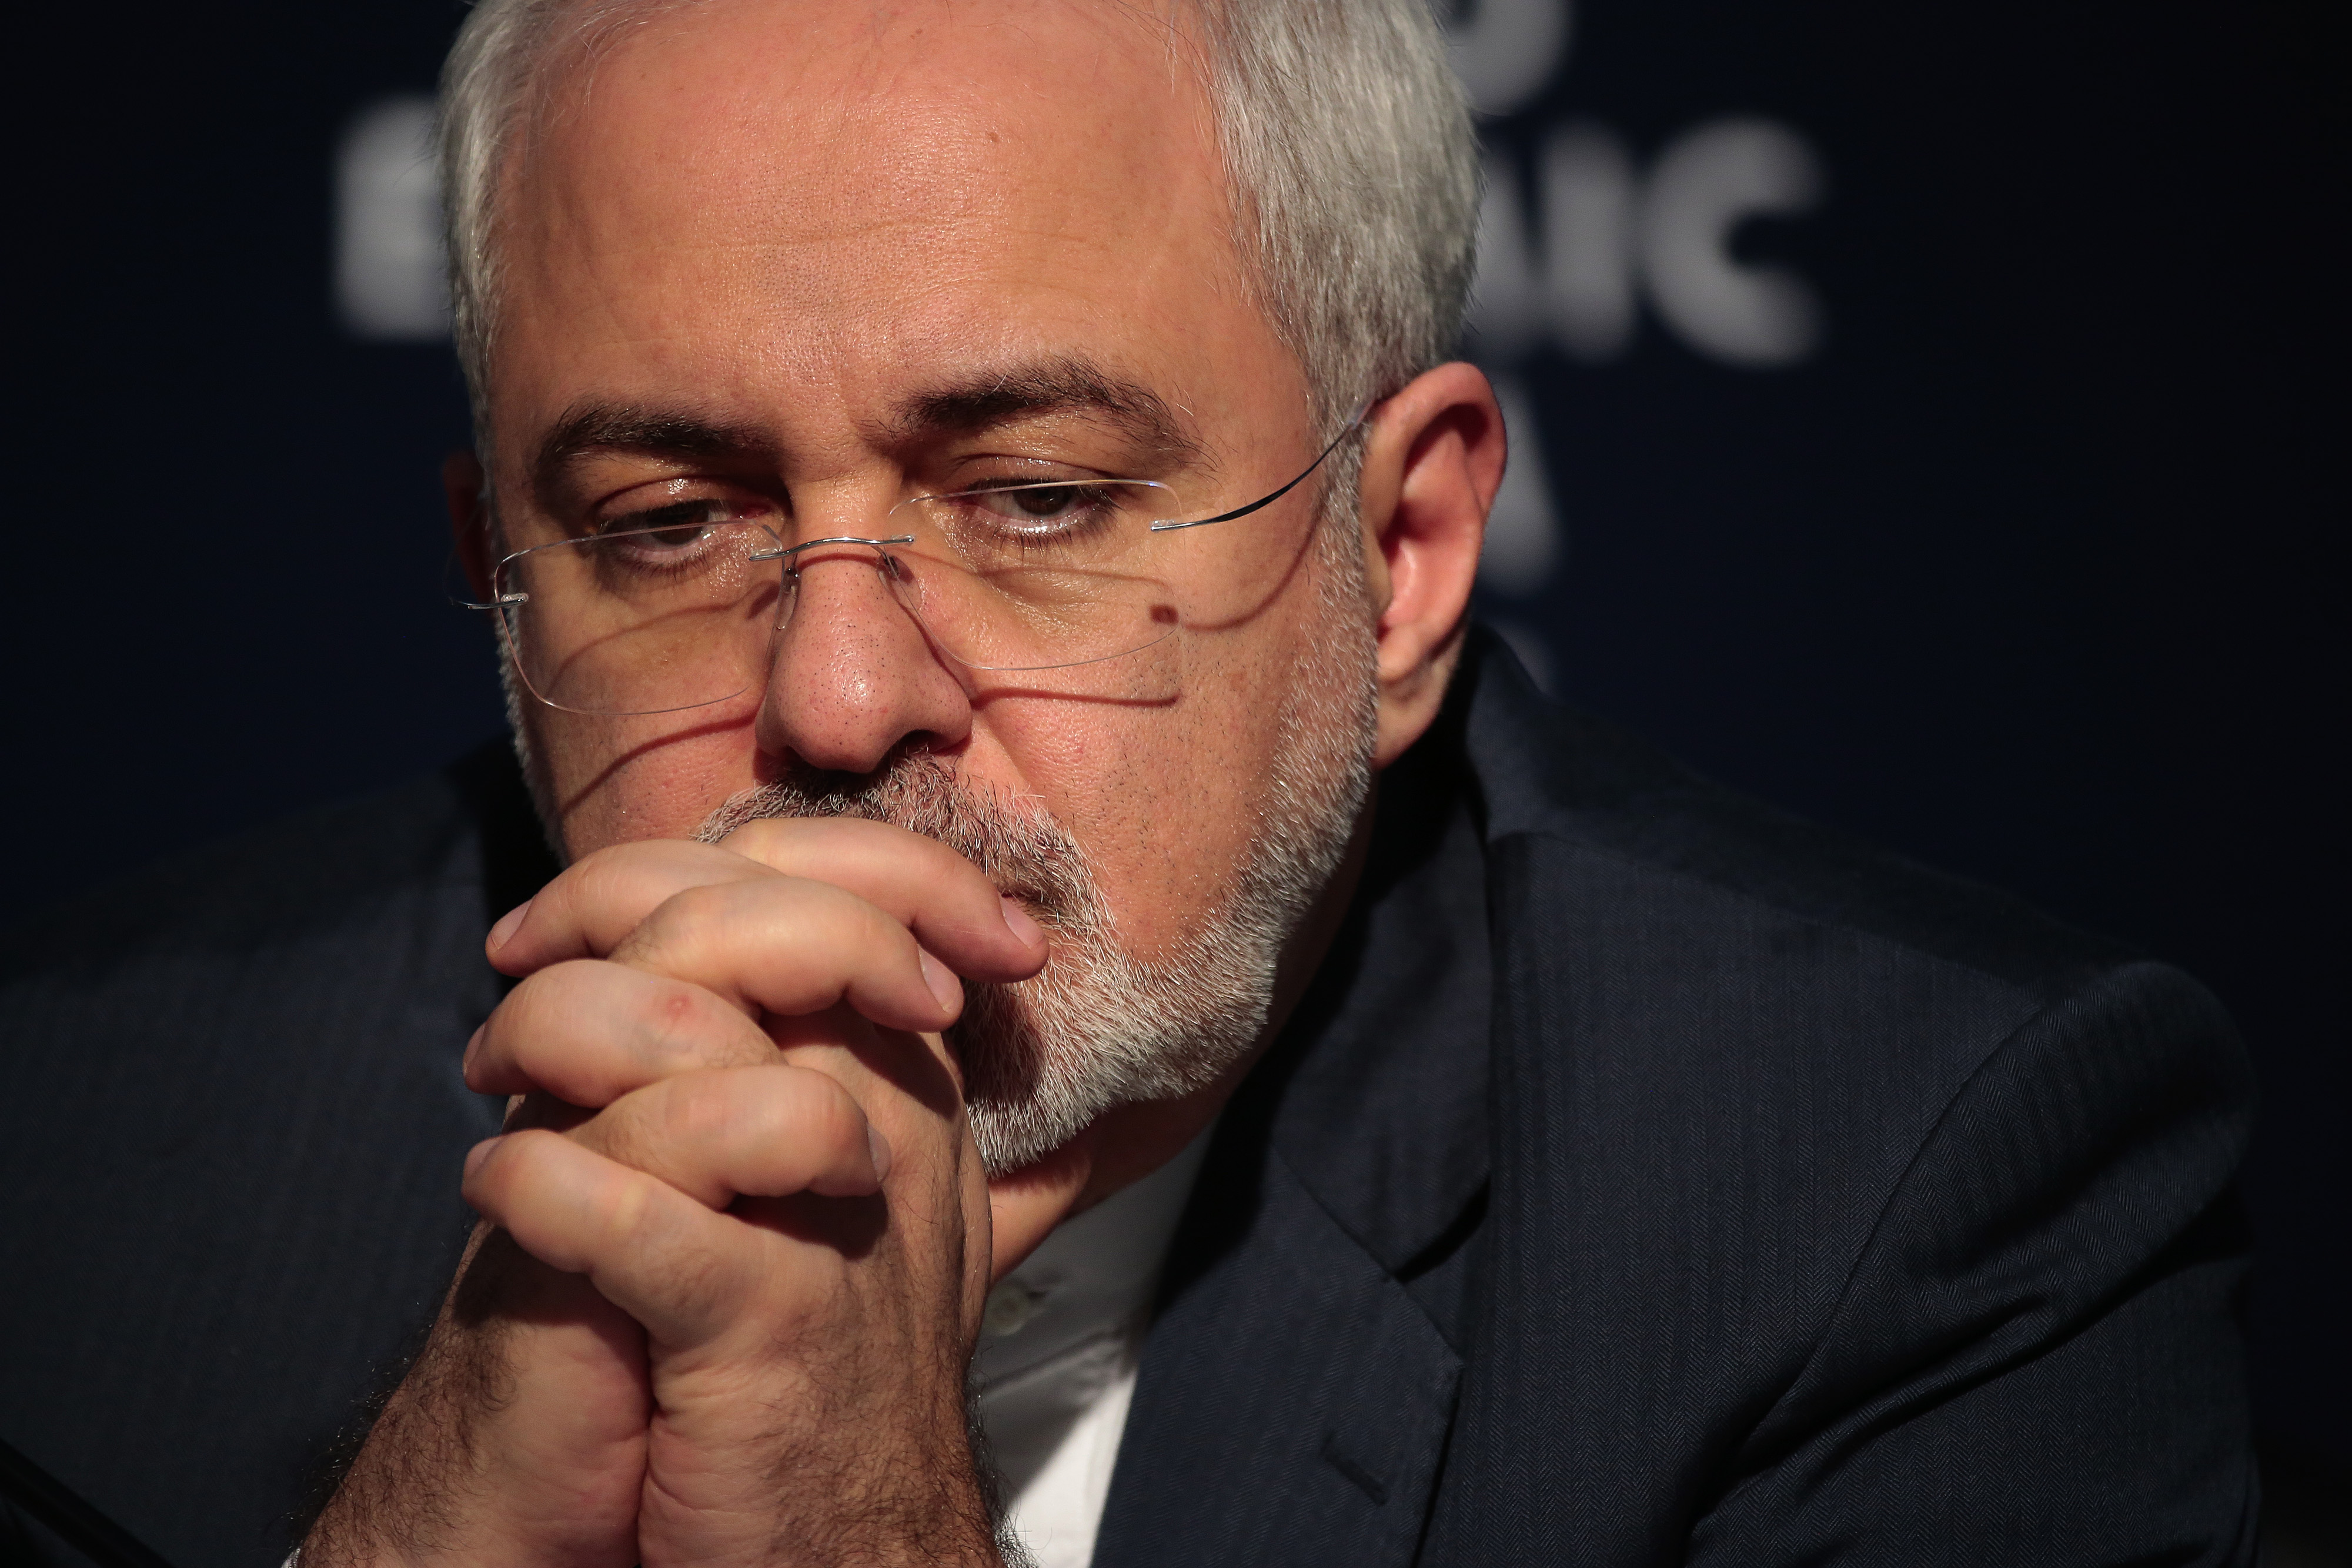 Mohammad Javad Zarif, Iran's foreign secretary, gestures during a news conference at the World Economic Forum (WEF) in Davos, Switzerland, on Wednesday, Jan. 20, 2016. World leaders, influential executives, bankers and policy makers attend the 46th annual meeting of the World Economic Forum in Davos from Jan. 20 - 23. Photographer: Jason Alden/Bloomberg *** Local Caption *** Mohammad Javad Zarif